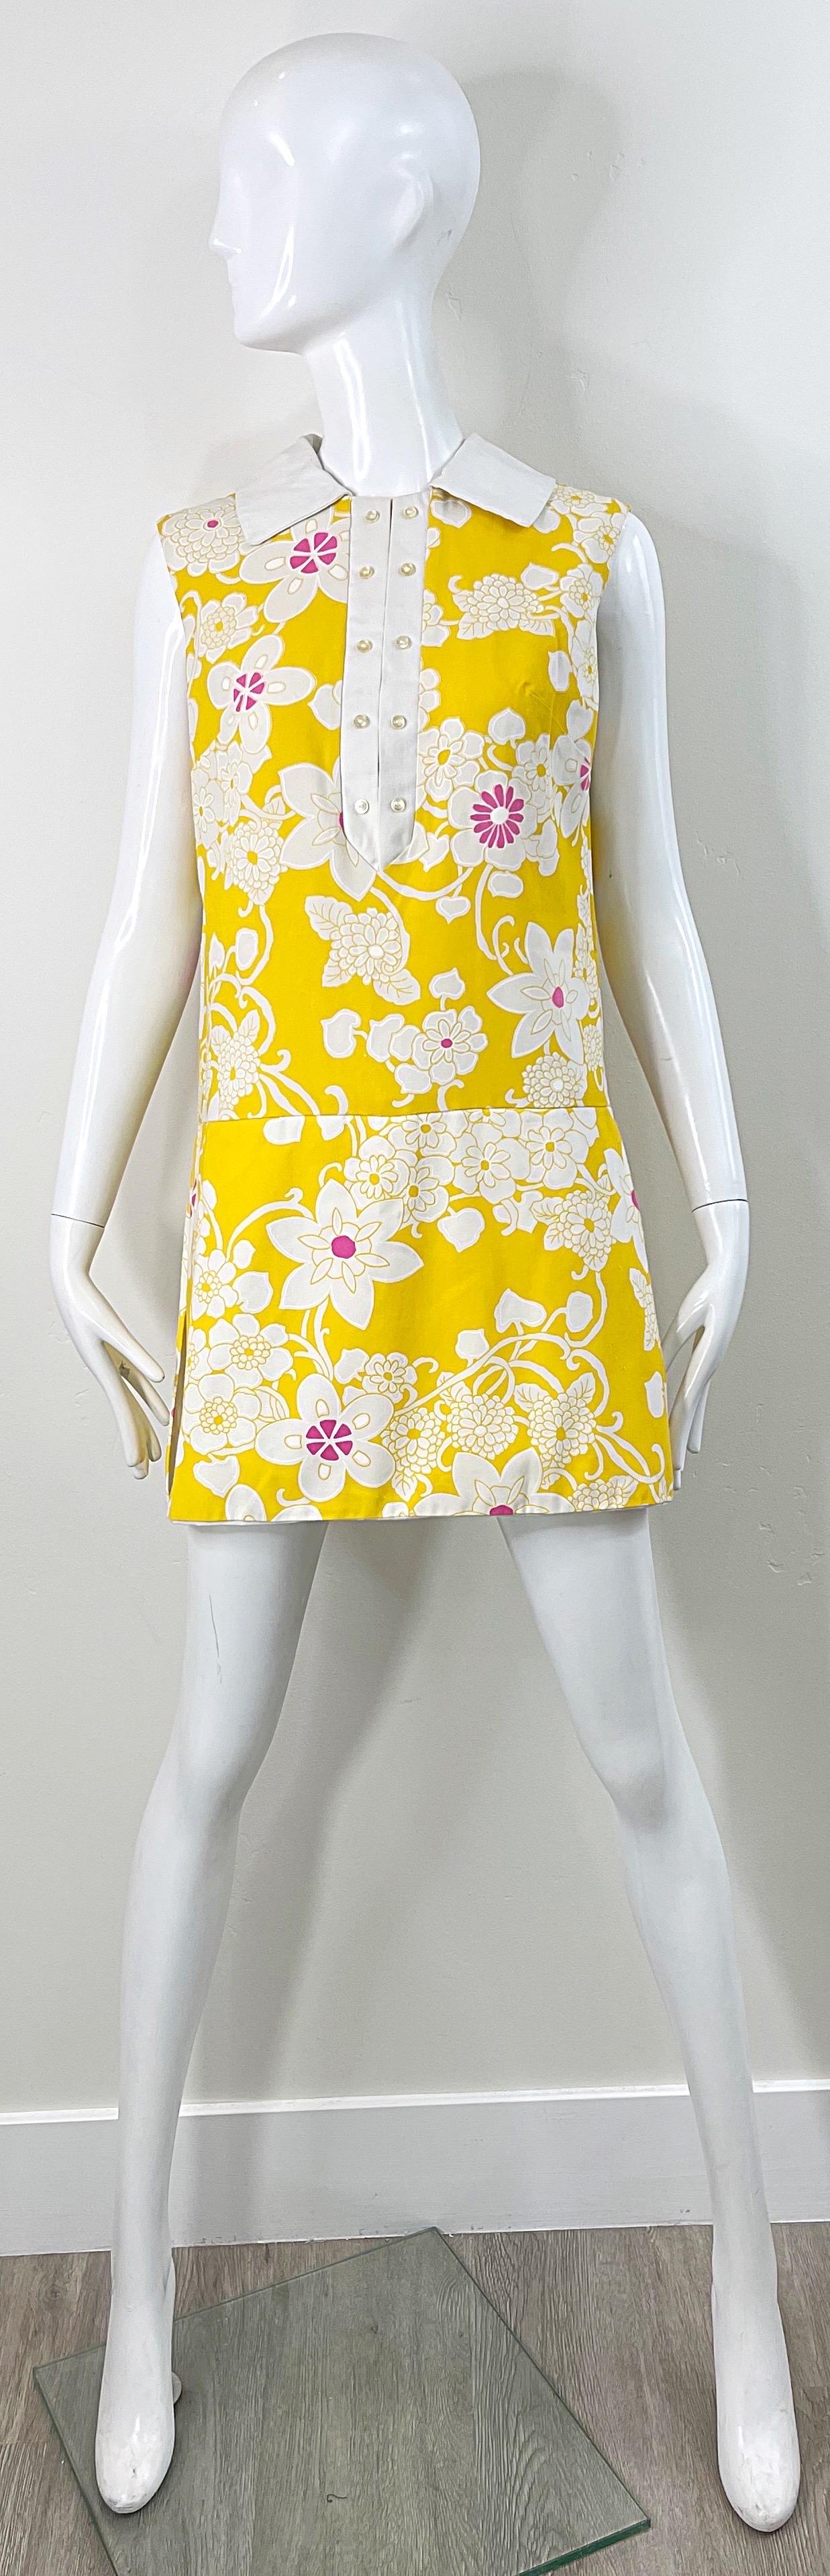 Chic 1960s yellow, pink and white romper ! Features vibrant yellow background, with hot pink and white flowers printed throughout. Looks like a dress, but is really a romper with a skirt over. Mock buttons up the front. Full metal zipper up the back